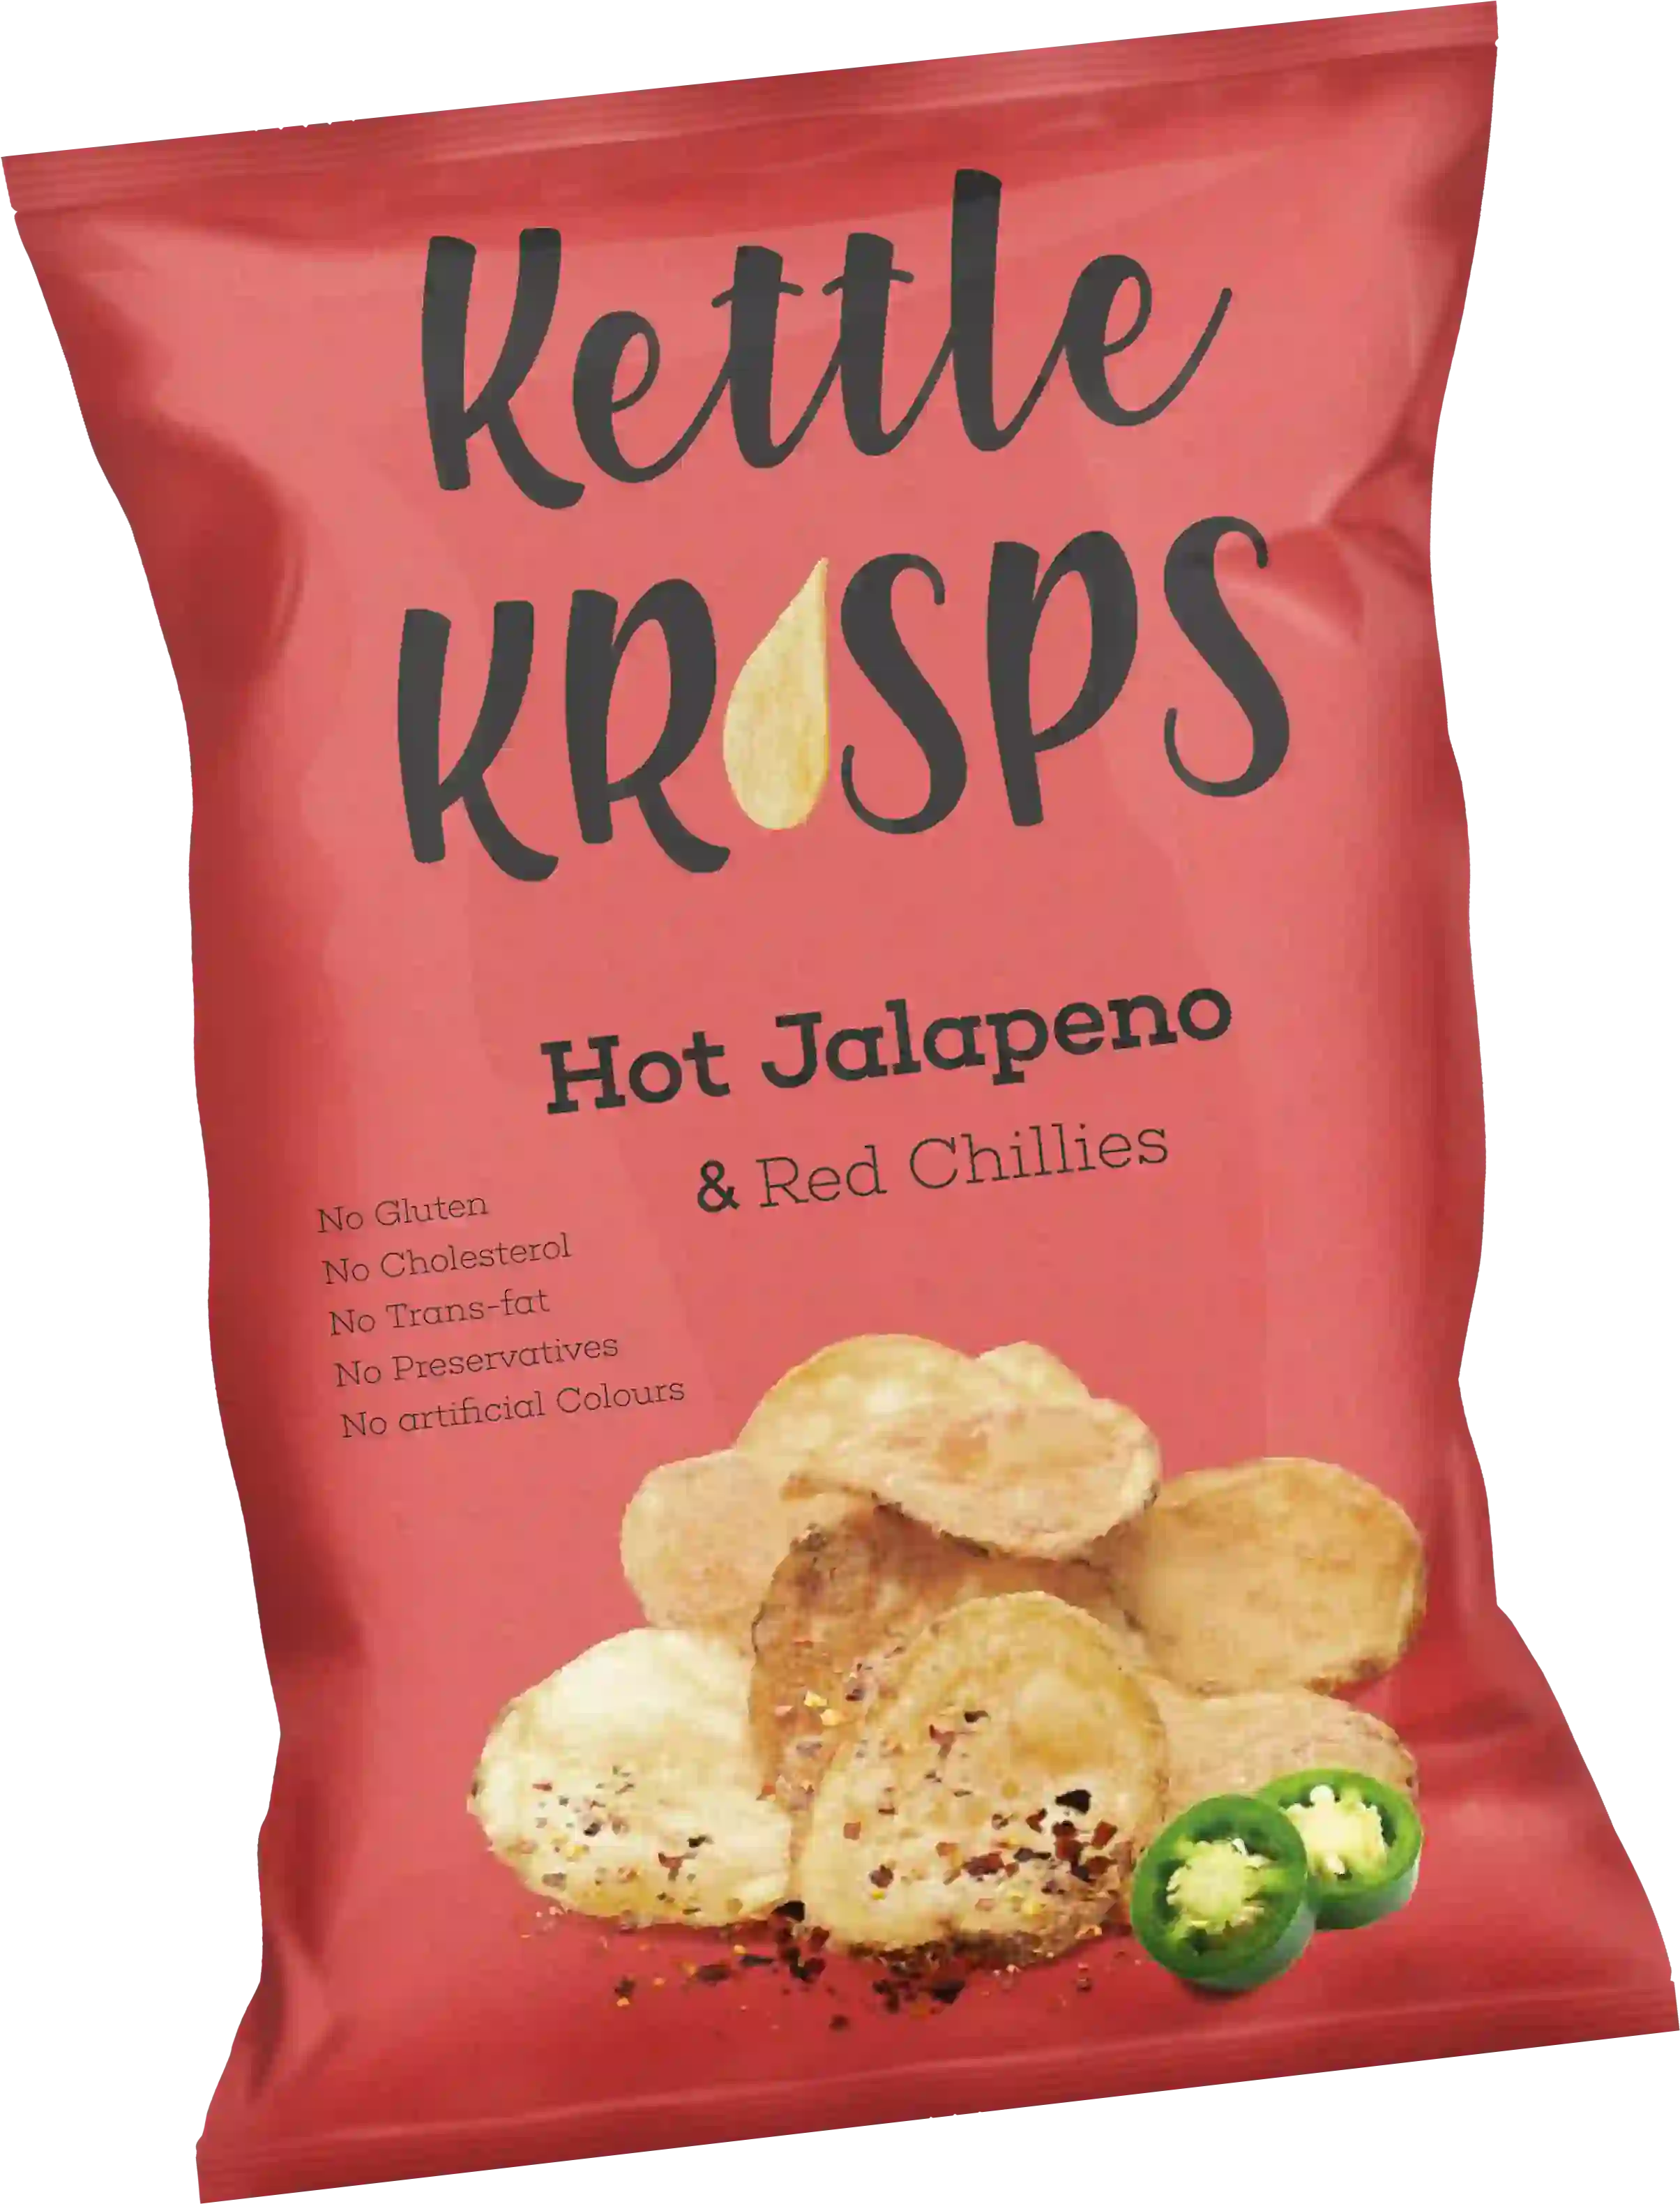 Kettle Krisps Hot Jalapeno & Red Chillies Pouch